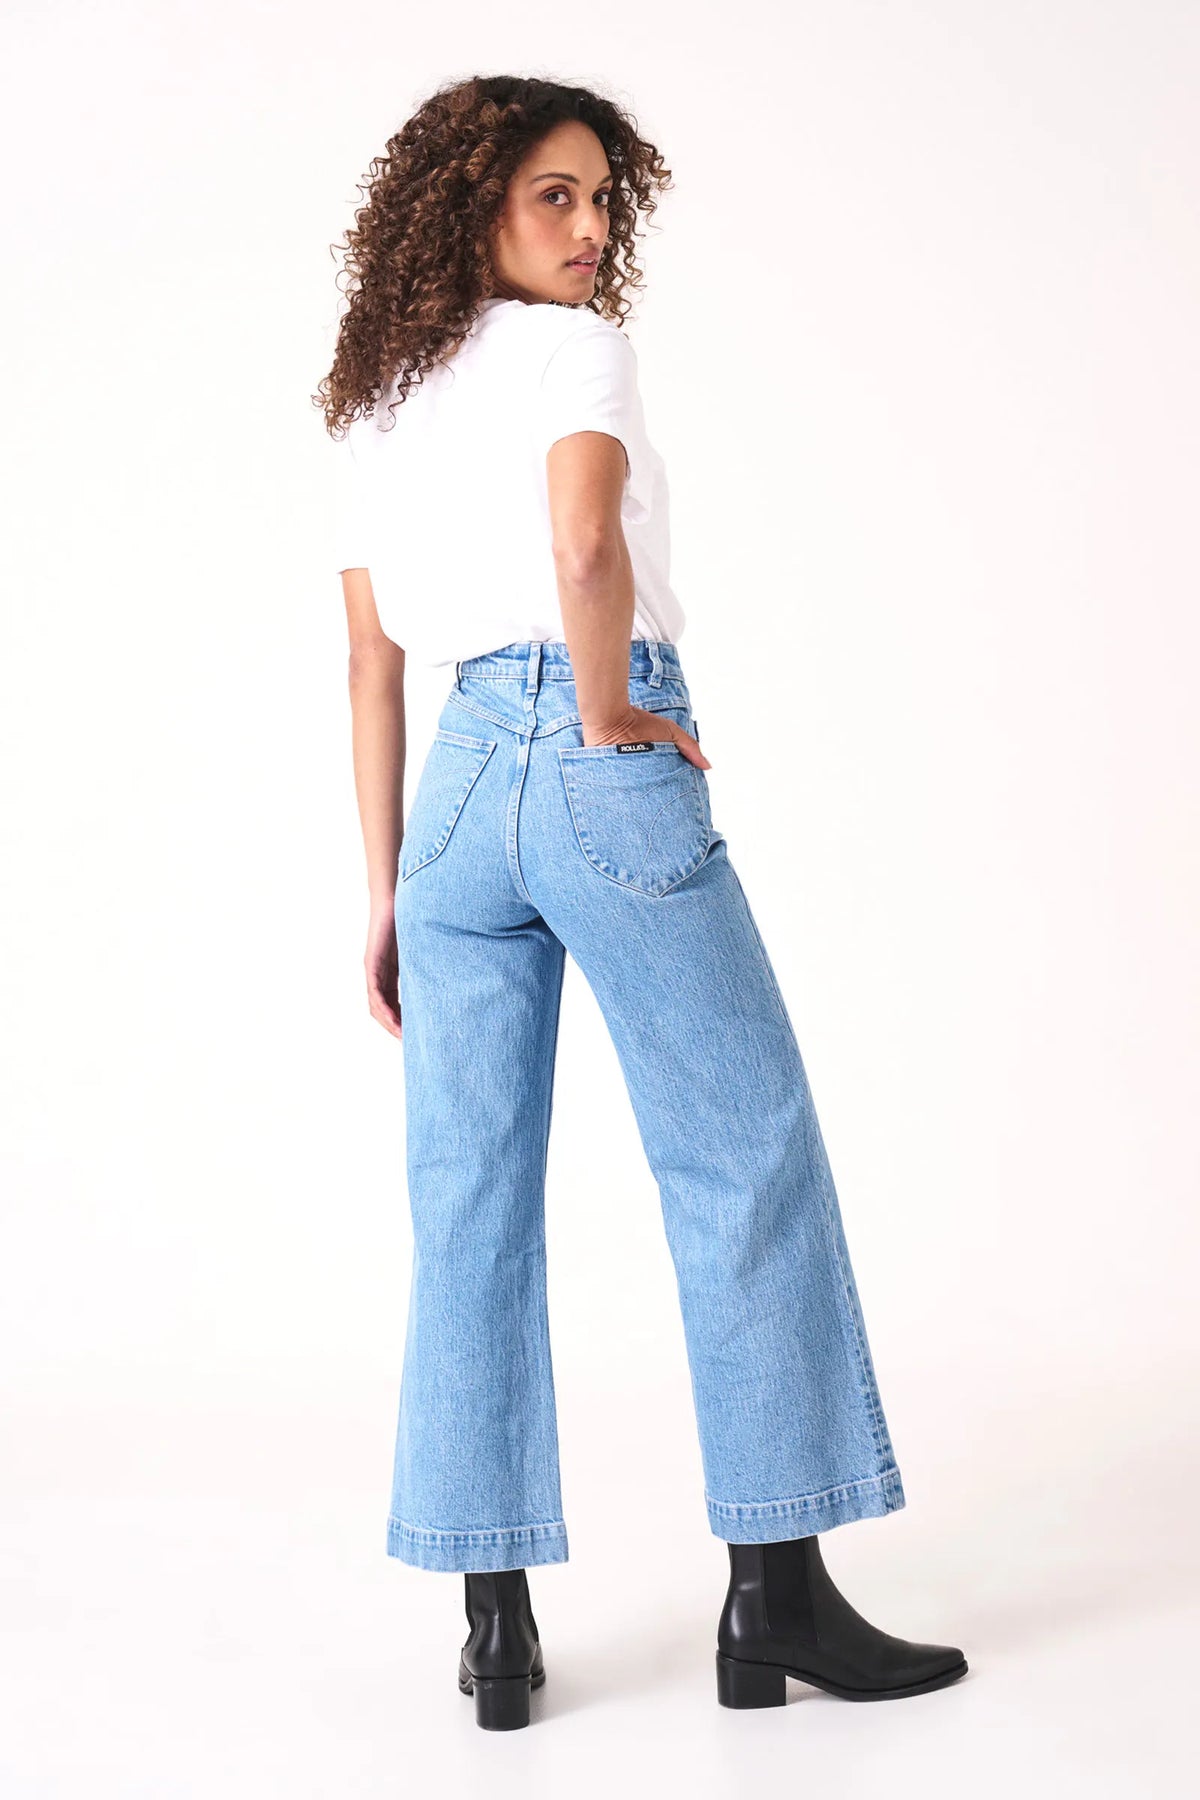 Sailor Jean in Lily Blue